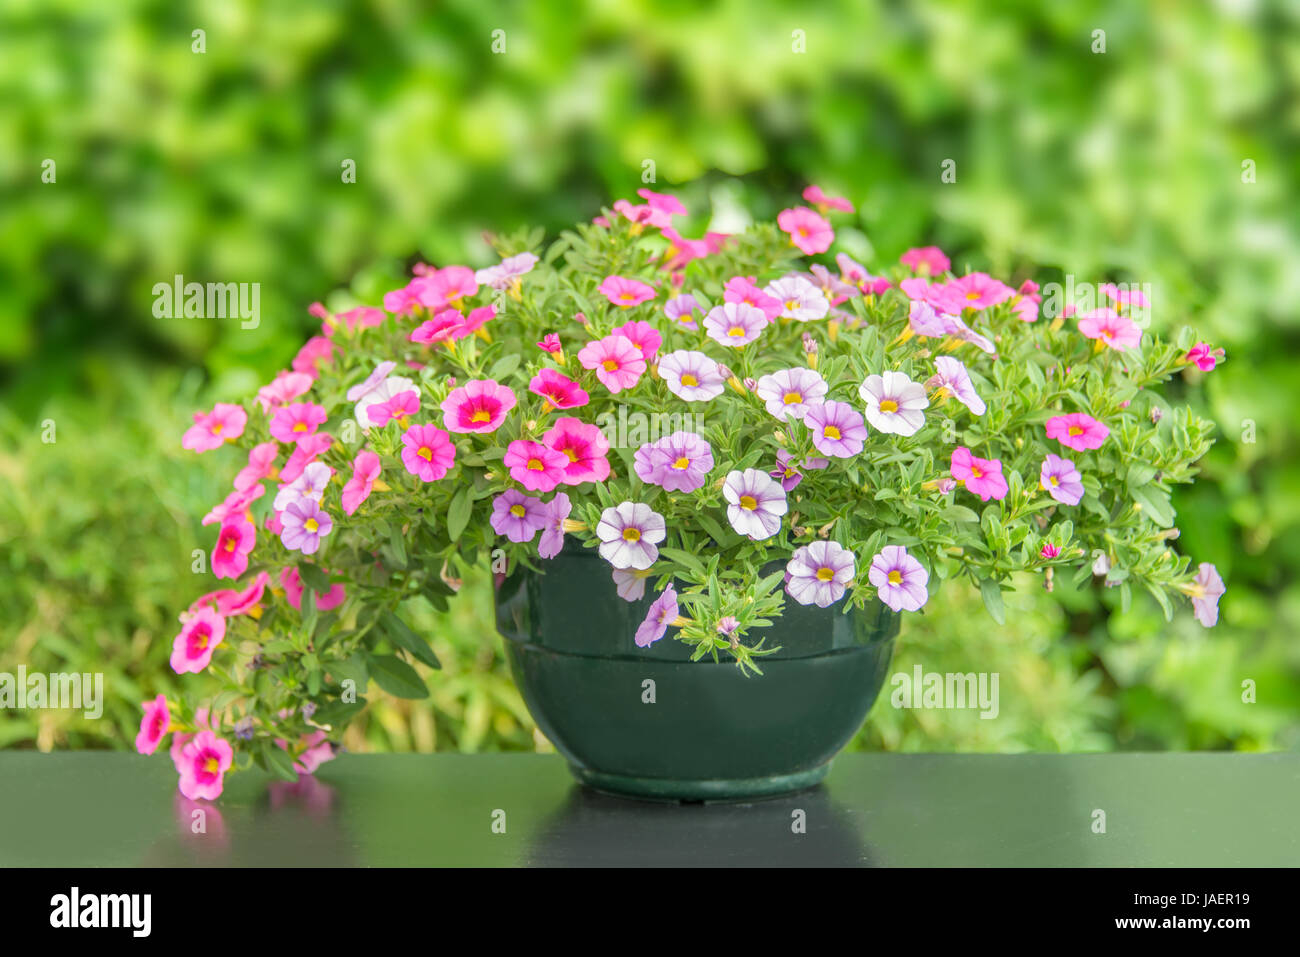 Pot of colorful pink petunia flowers on a table, isolated green nature background Stock Photo